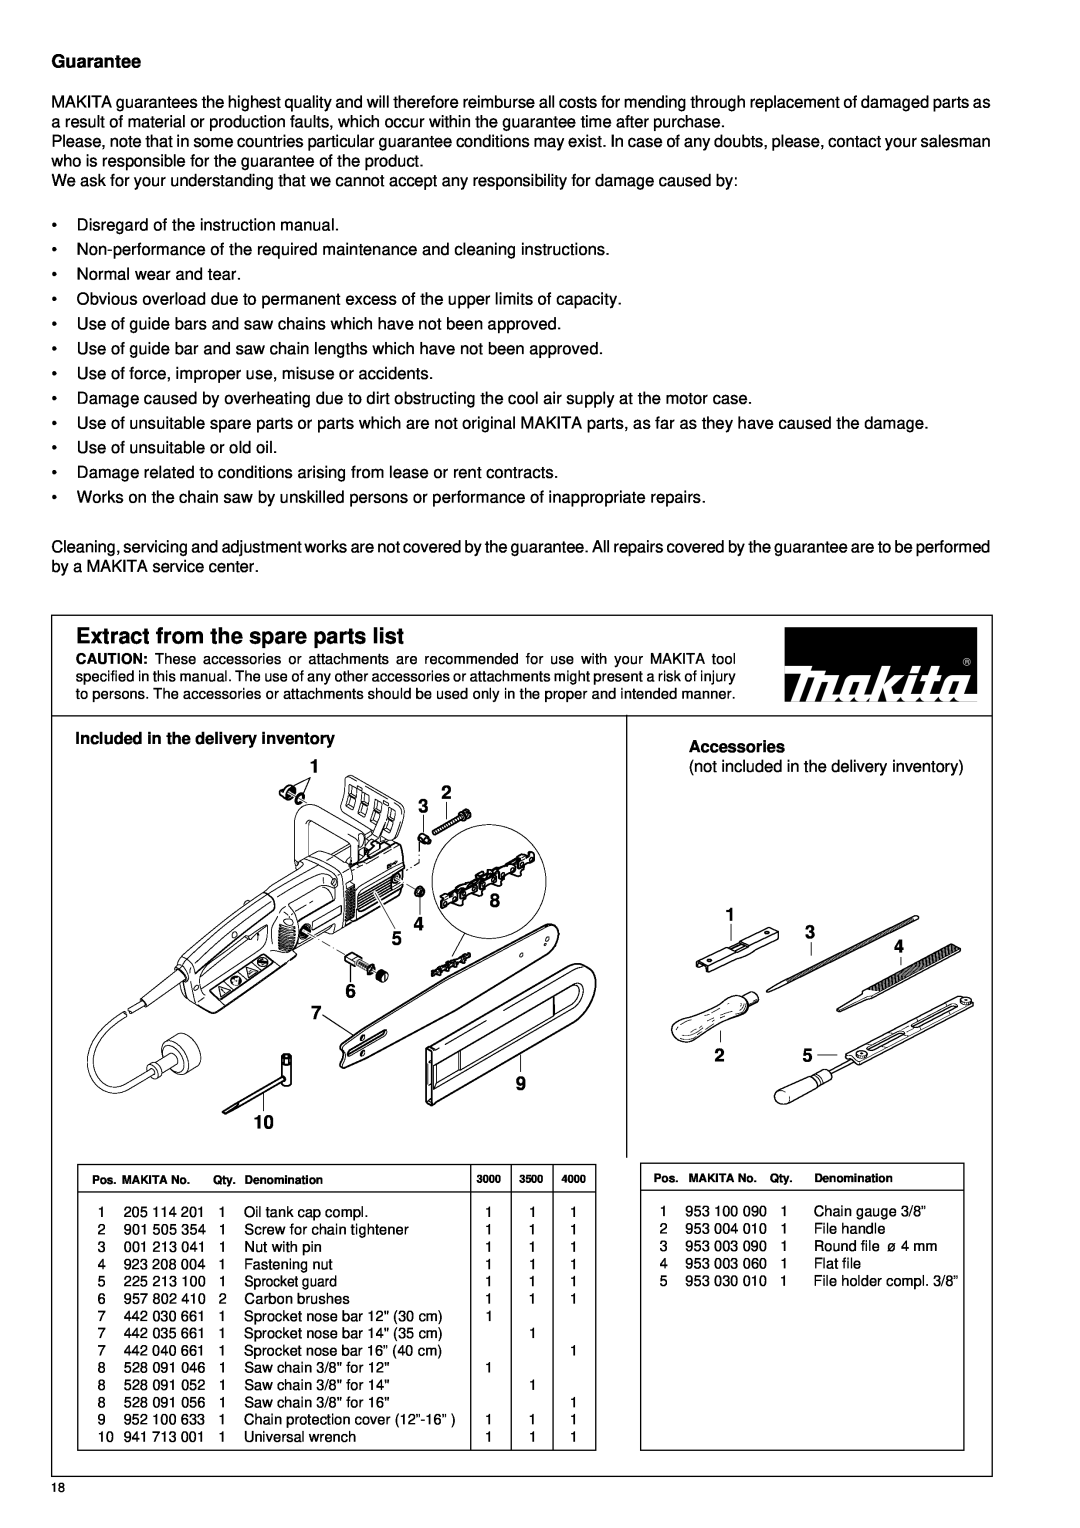 Makita UC 3000, UC 3500, UC 4000 manual Extract from the spare parts list, Guarantee, Included in the delivery inventory 